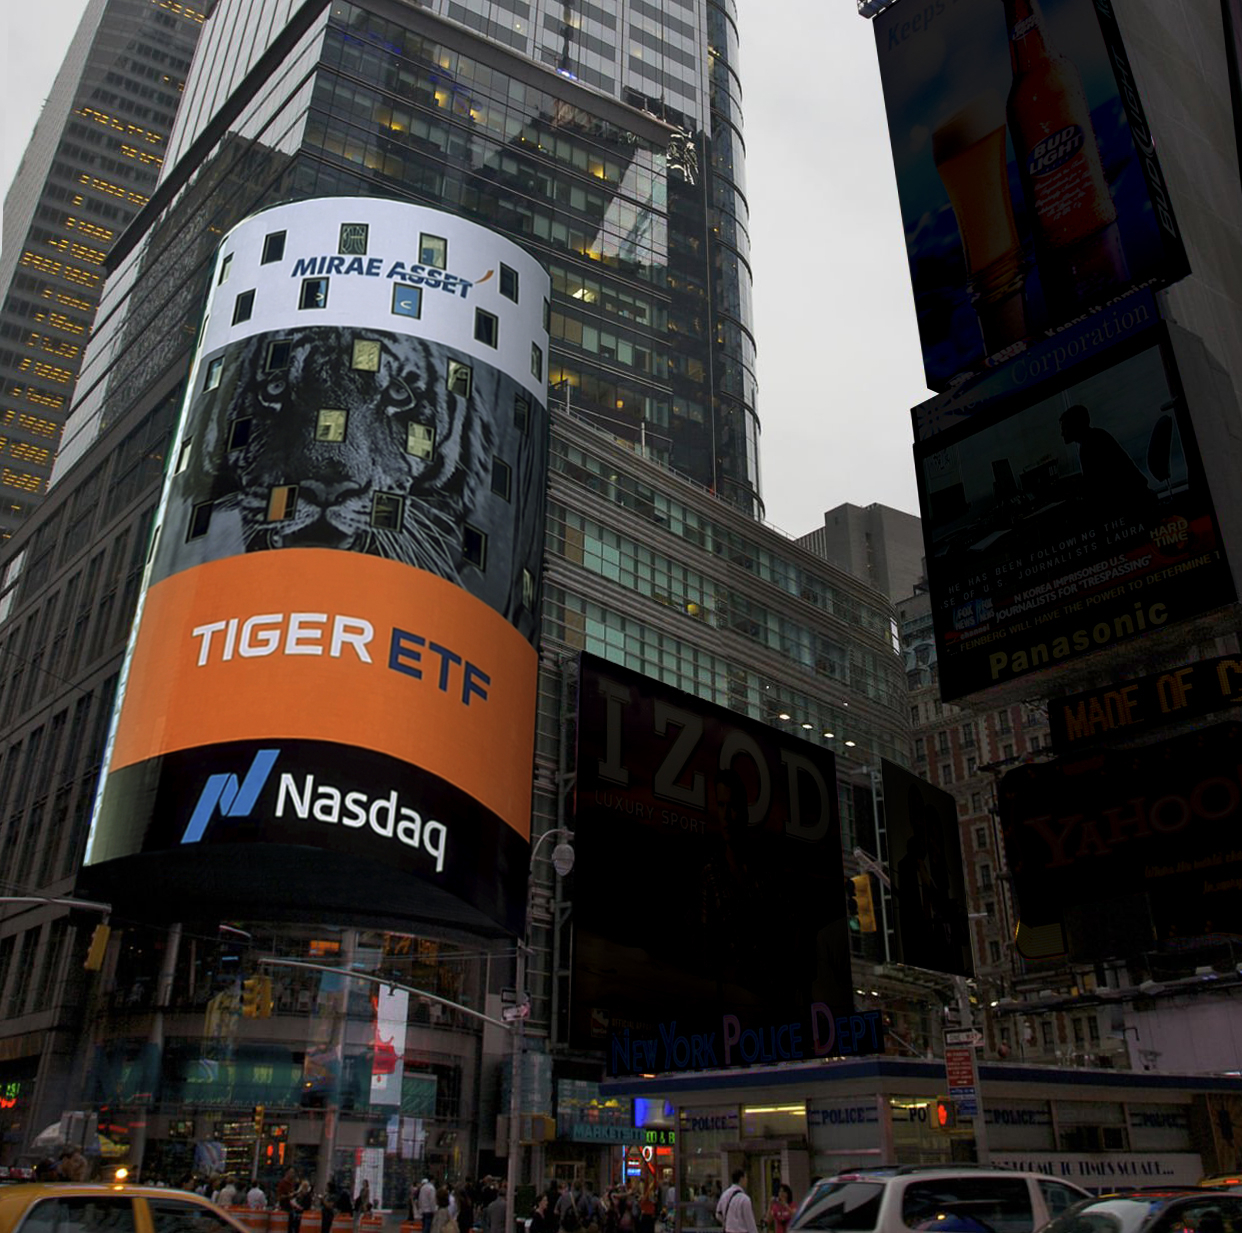 Advertisement for the Tiger ETF in New York City (Mirae Asset Global Investments)